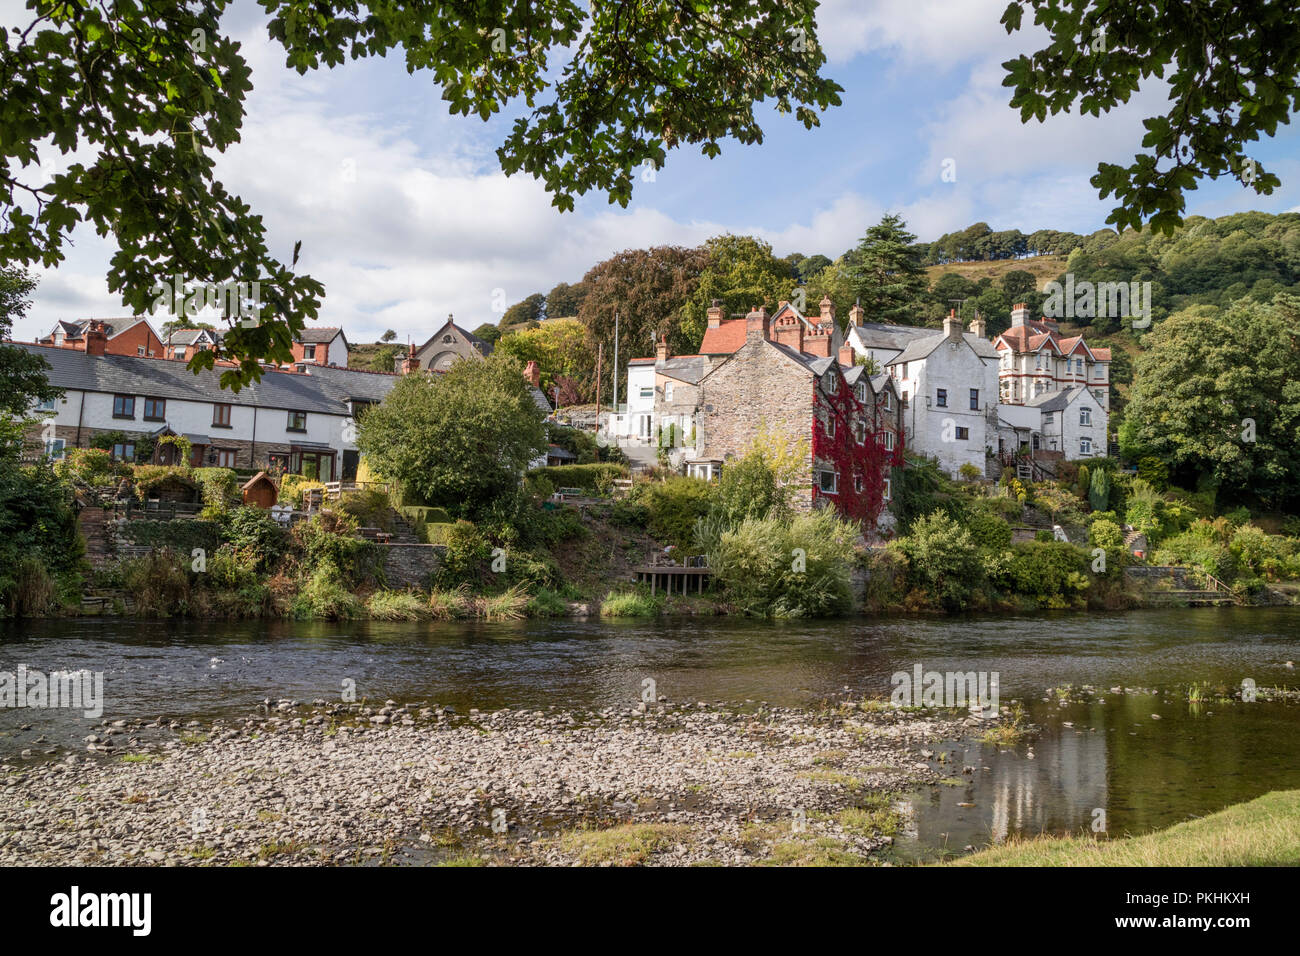 The picturesque riverside village of Carrog on the River Dee in the Vale of Llangollen, Wales, UK Stock Photo